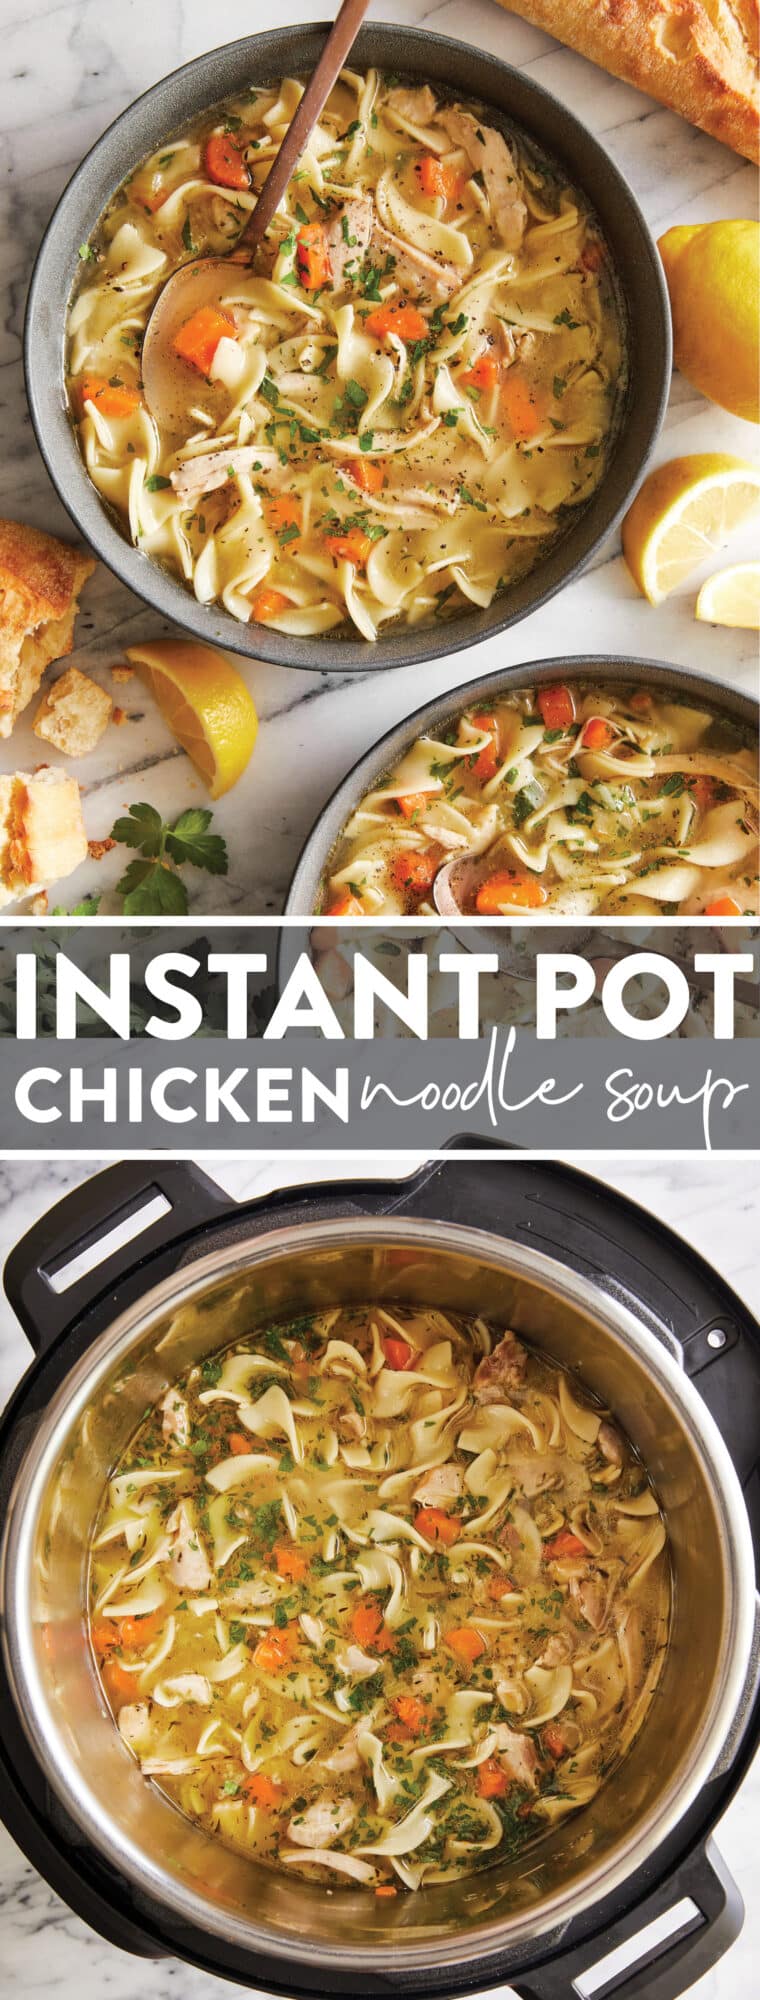 Instant Pot Chicken Noodle Soup (Dump-and-Go!) - Thriving Home